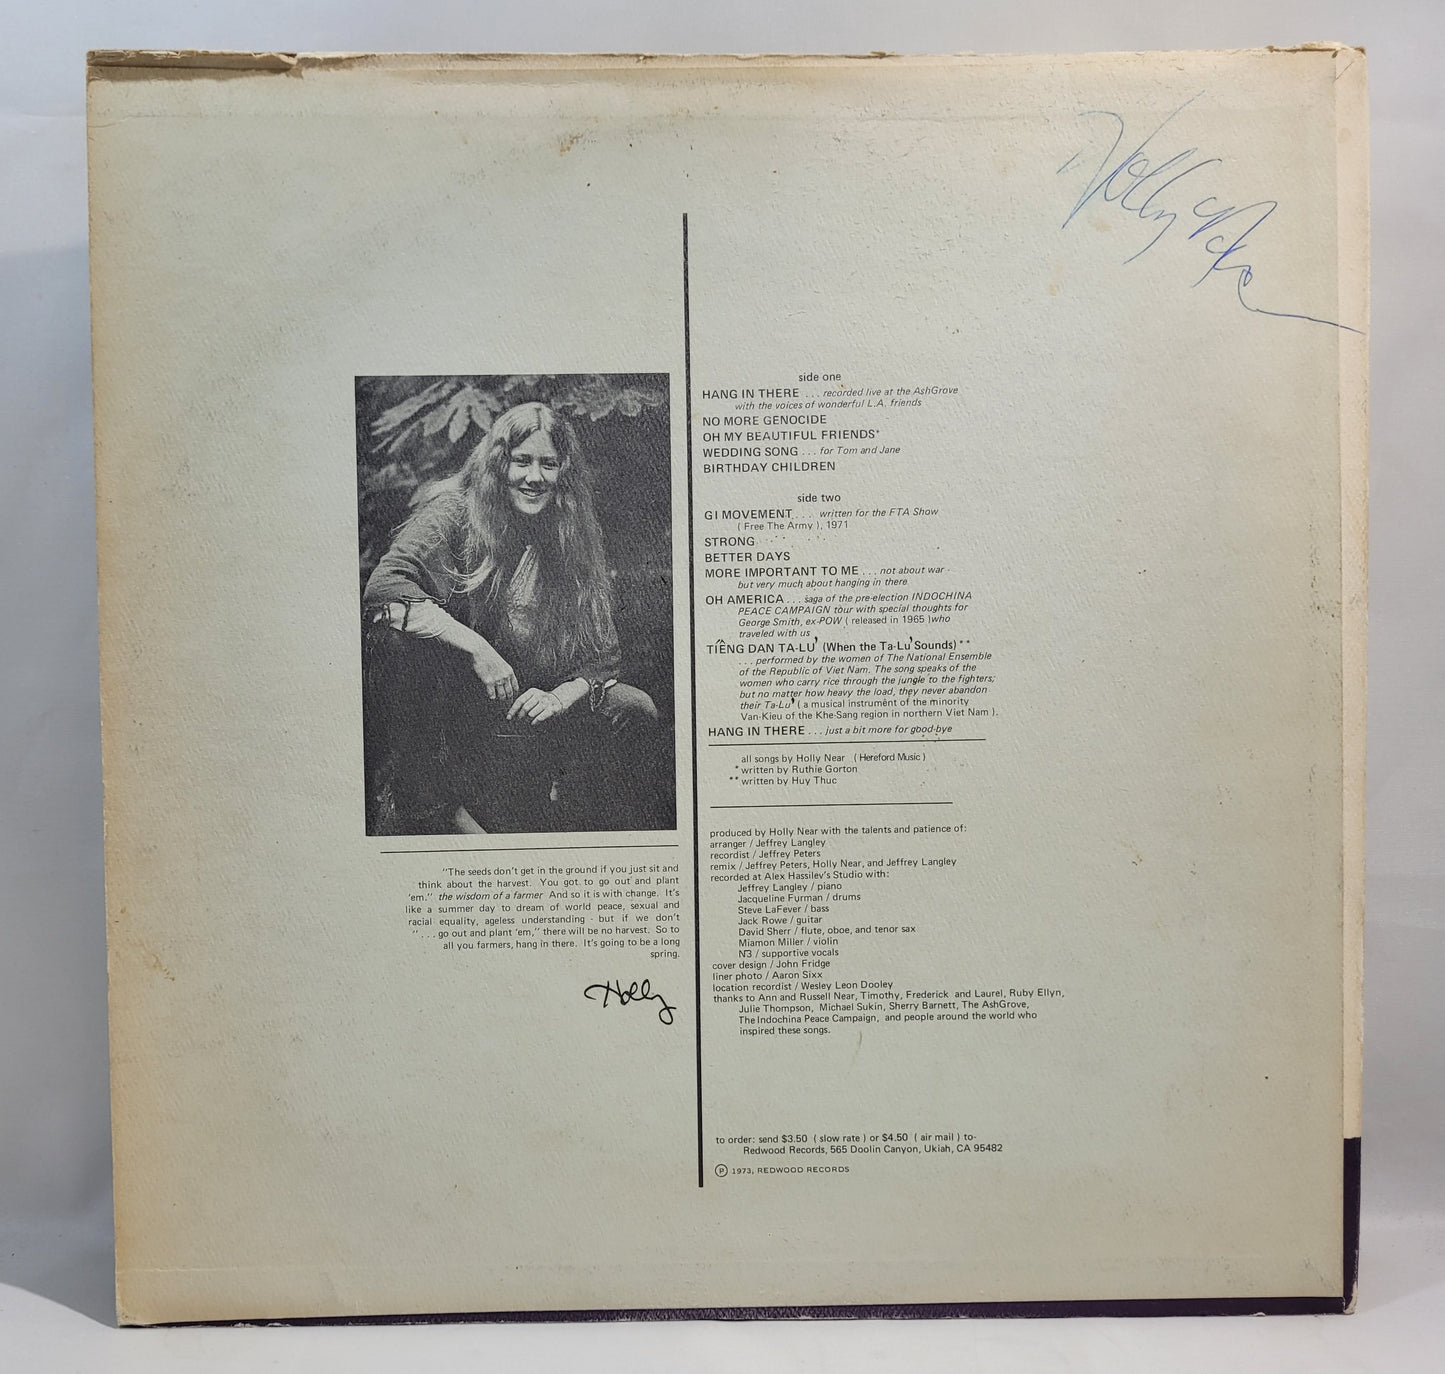 Holly Near - Hang in There [Vinyl Record LP]